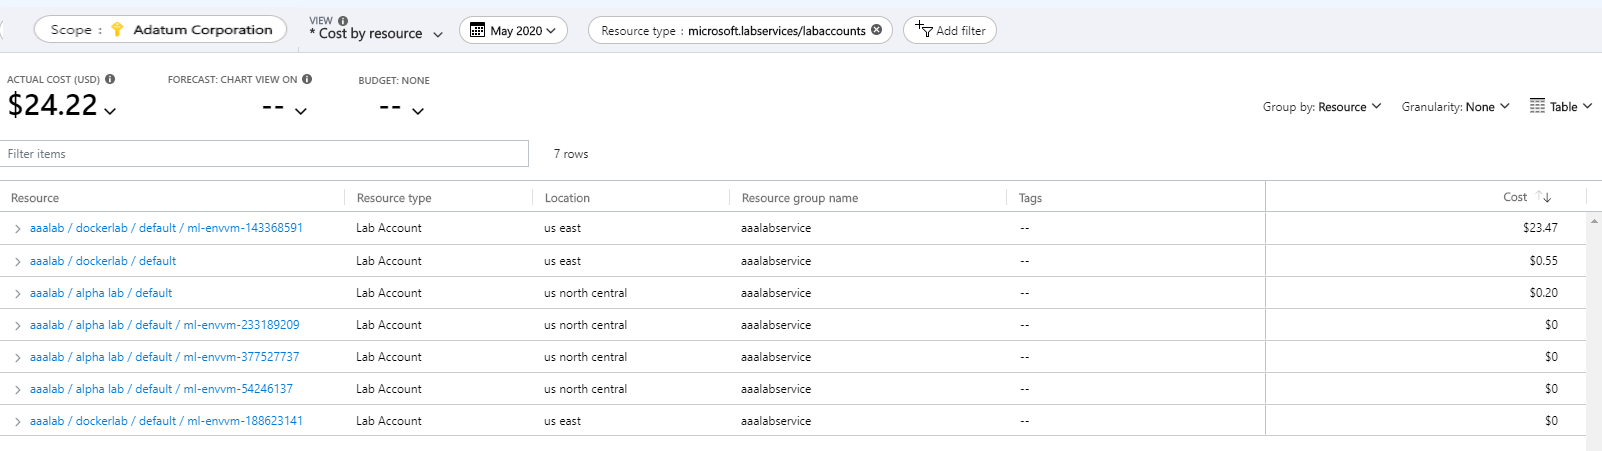 Screenshot that shows an example cost analysis for a subscription for Azure Lab Services associated costs.